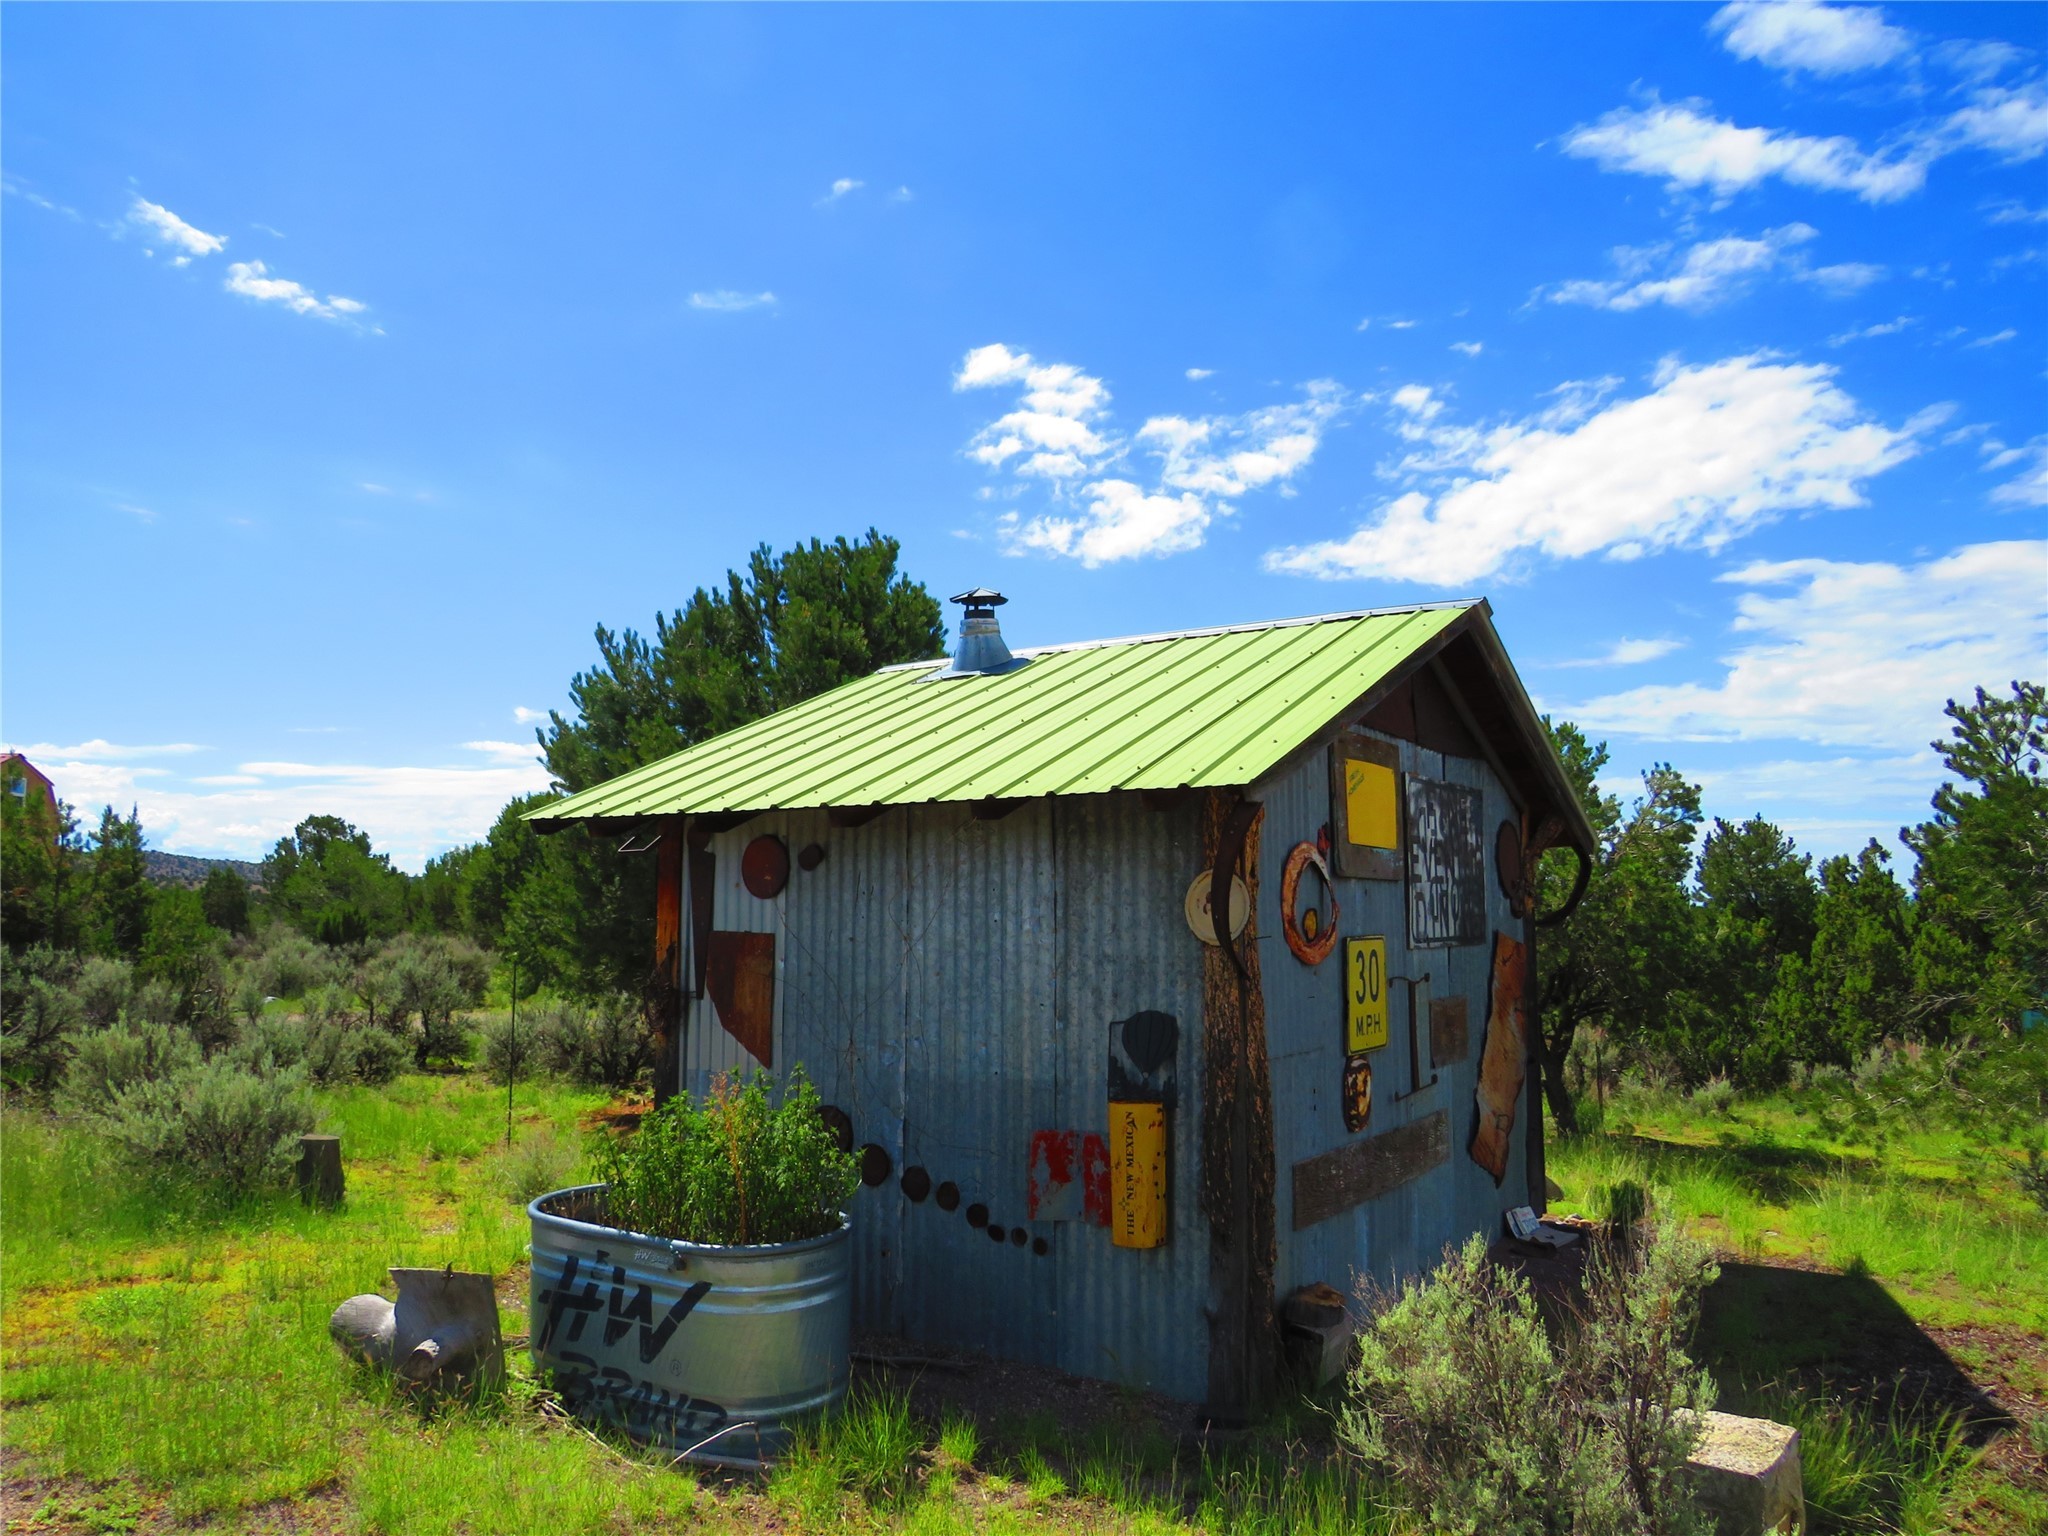 71 Private Drive 1685, El Rito, New Mexico 87530, 1 Bedroom Bedrooms, ,1 BathroomBathrooms,Residential,For Sale,71 Private Drive 1685,202232532